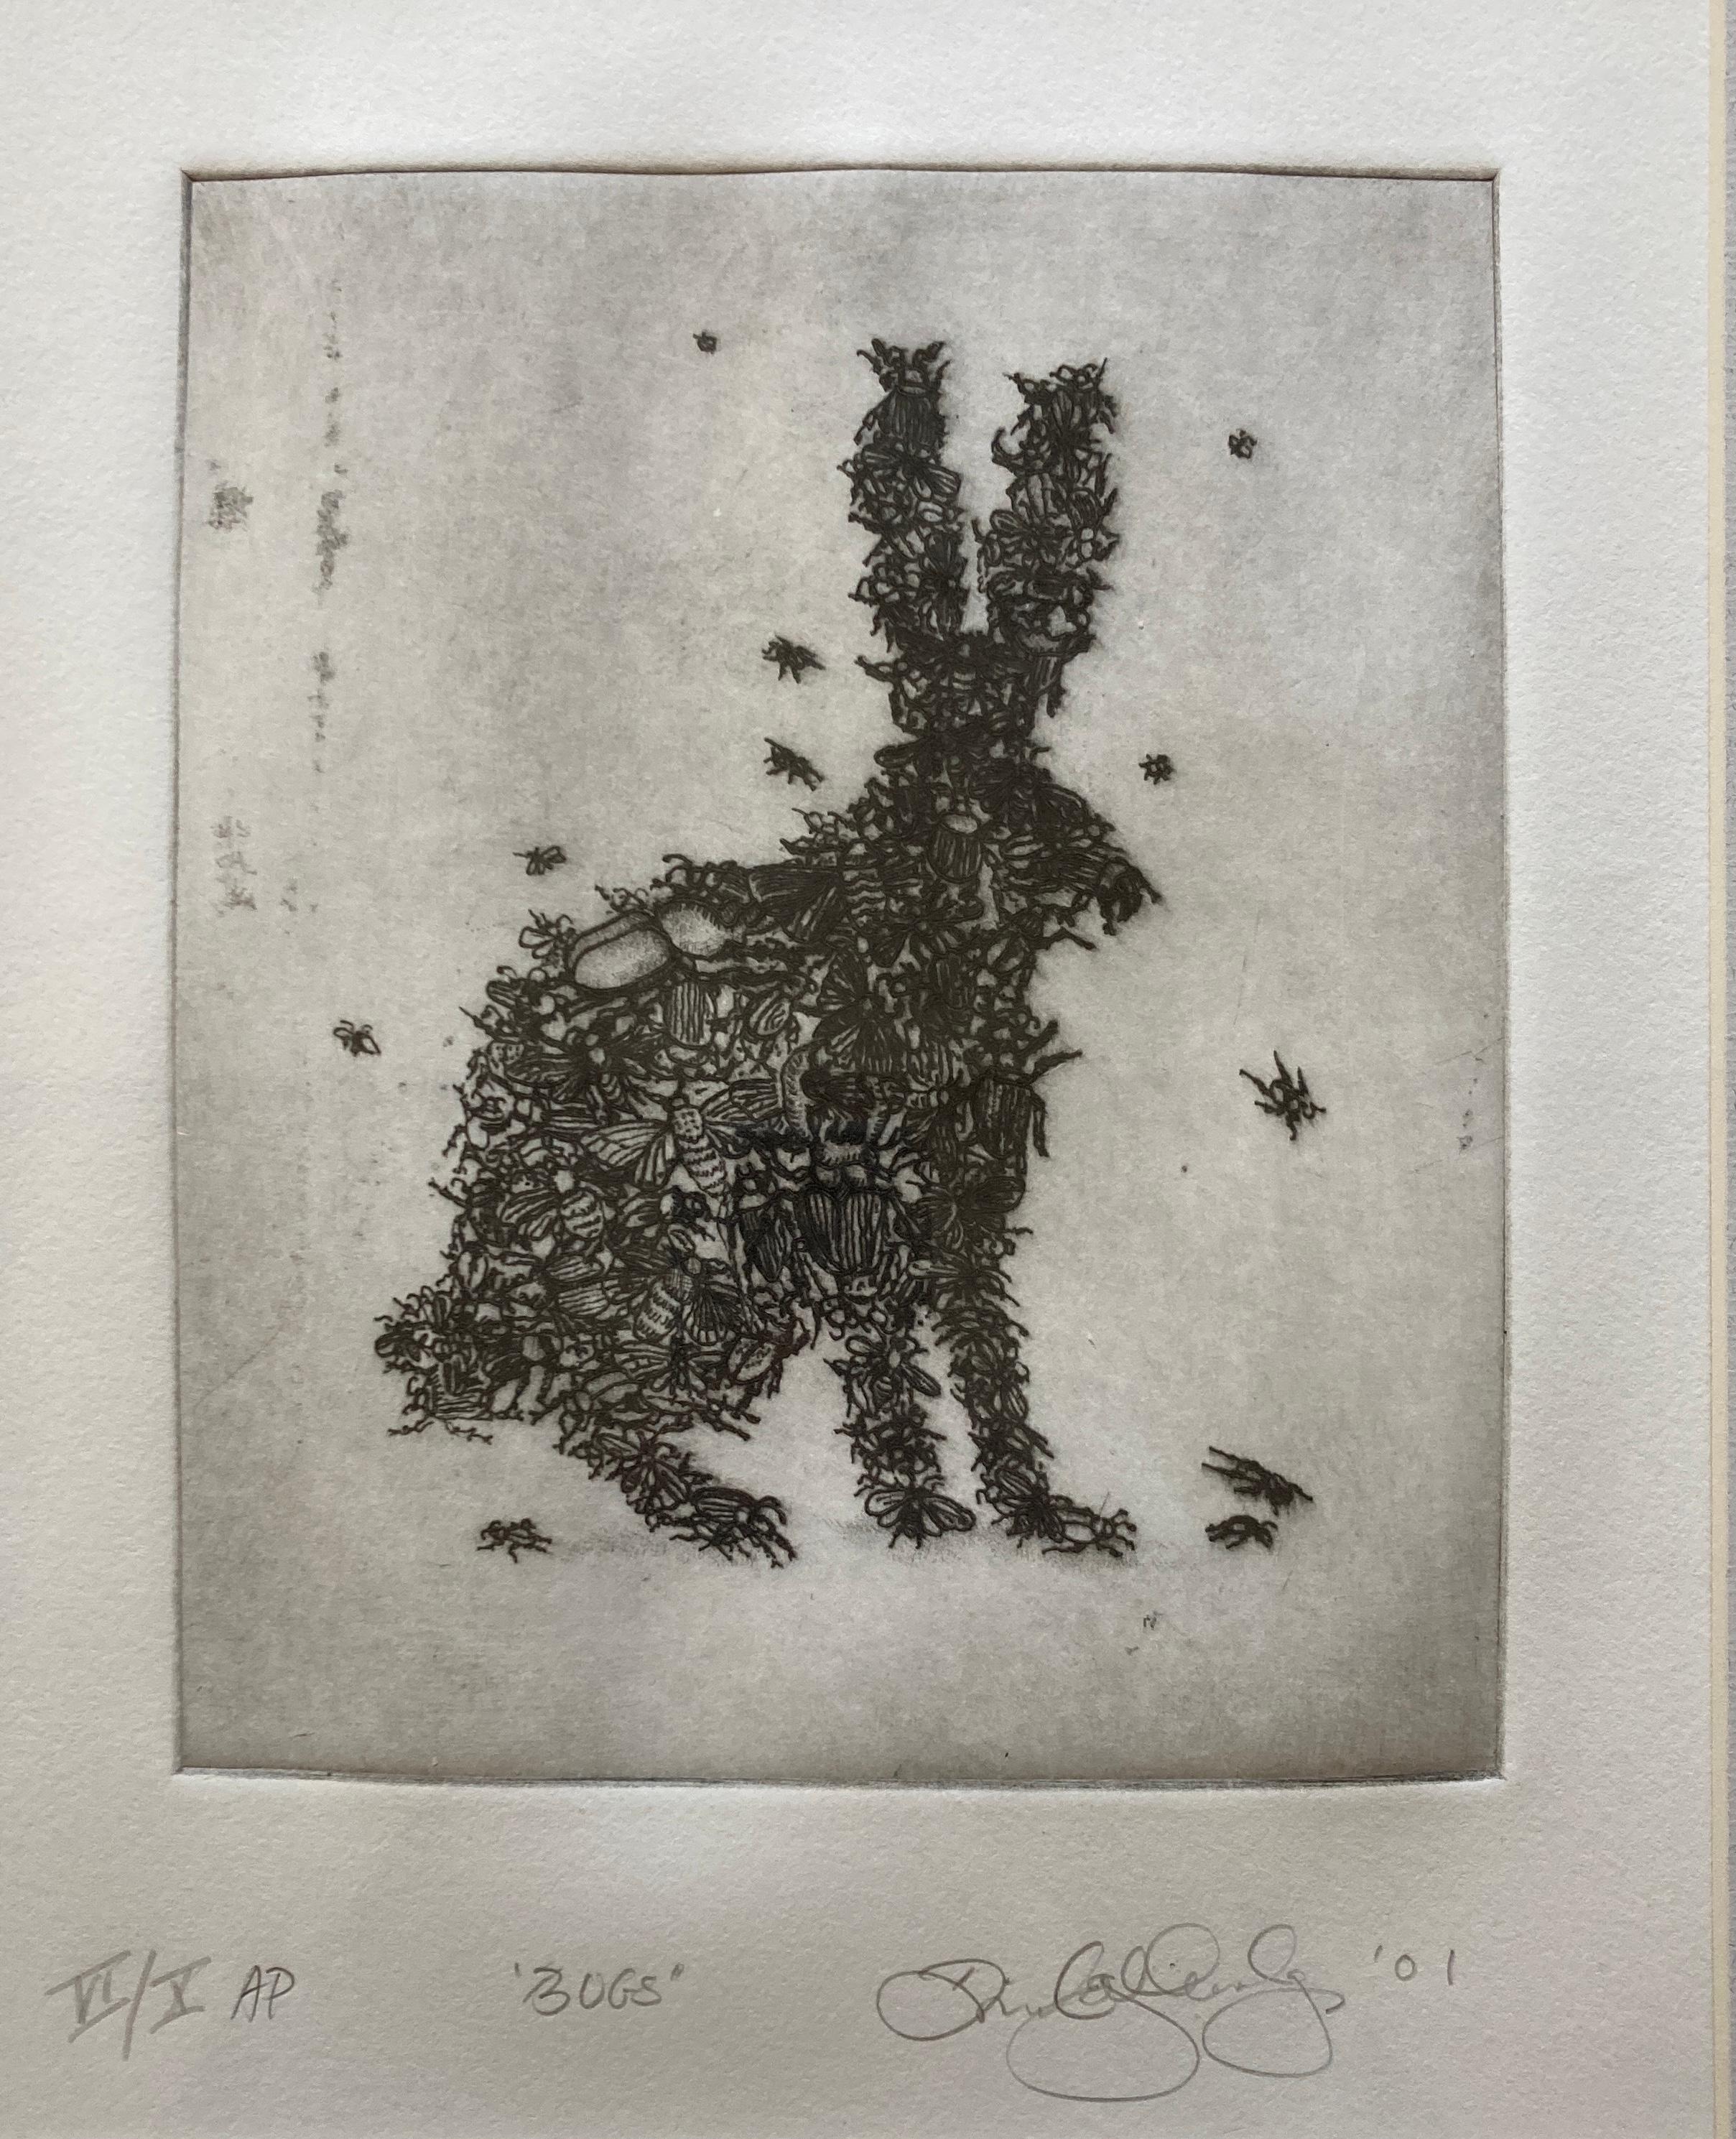 David Gilhooly (1943-2013). 
Bugs, 2001
Etching on wove paper
Artist's Proof XV/X (6/10) numbered in pencil lower left
Signed and dated in pencil lower right 
Dimensions: With Frame 21 1/4 x 18 1/4 inches; Sight:  11 1/2 x 9 1/4 inches; Image: 8 1/2